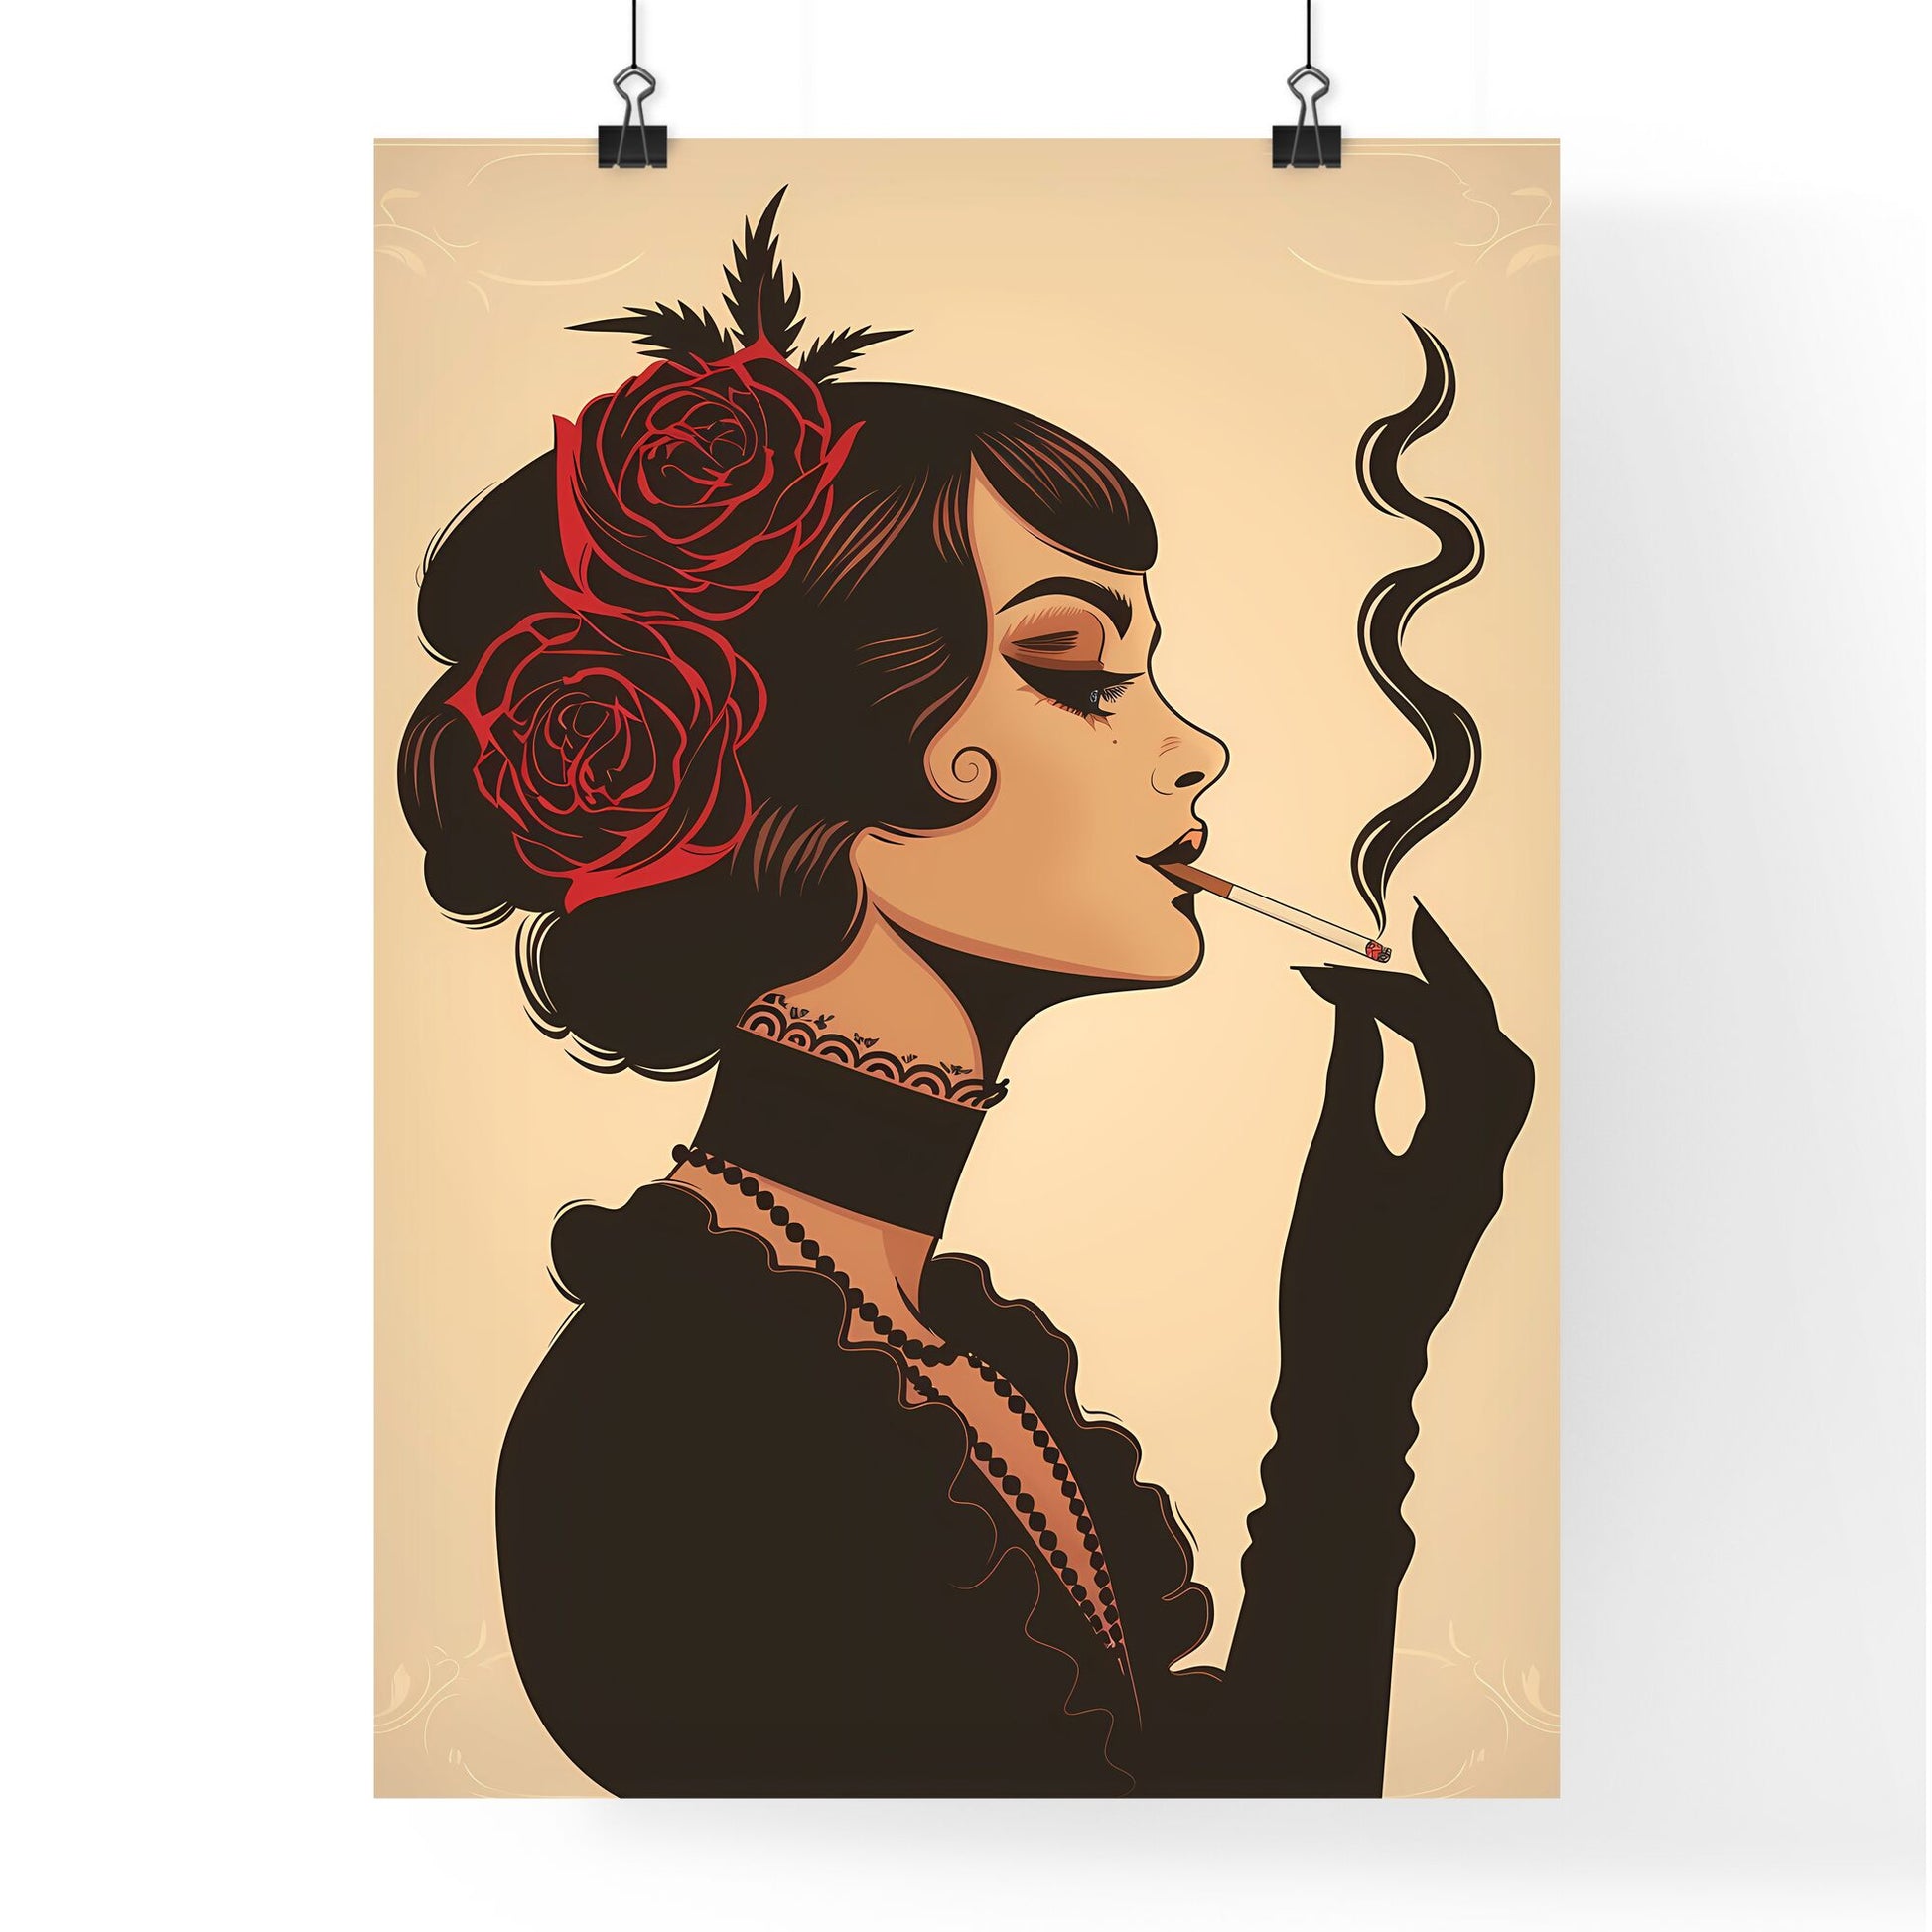 Elegant 1920s Woman Smoking Cigarette in Minimalist Cartoon, Exude Glamour and Artistry on a Vibrant White Background Default Title